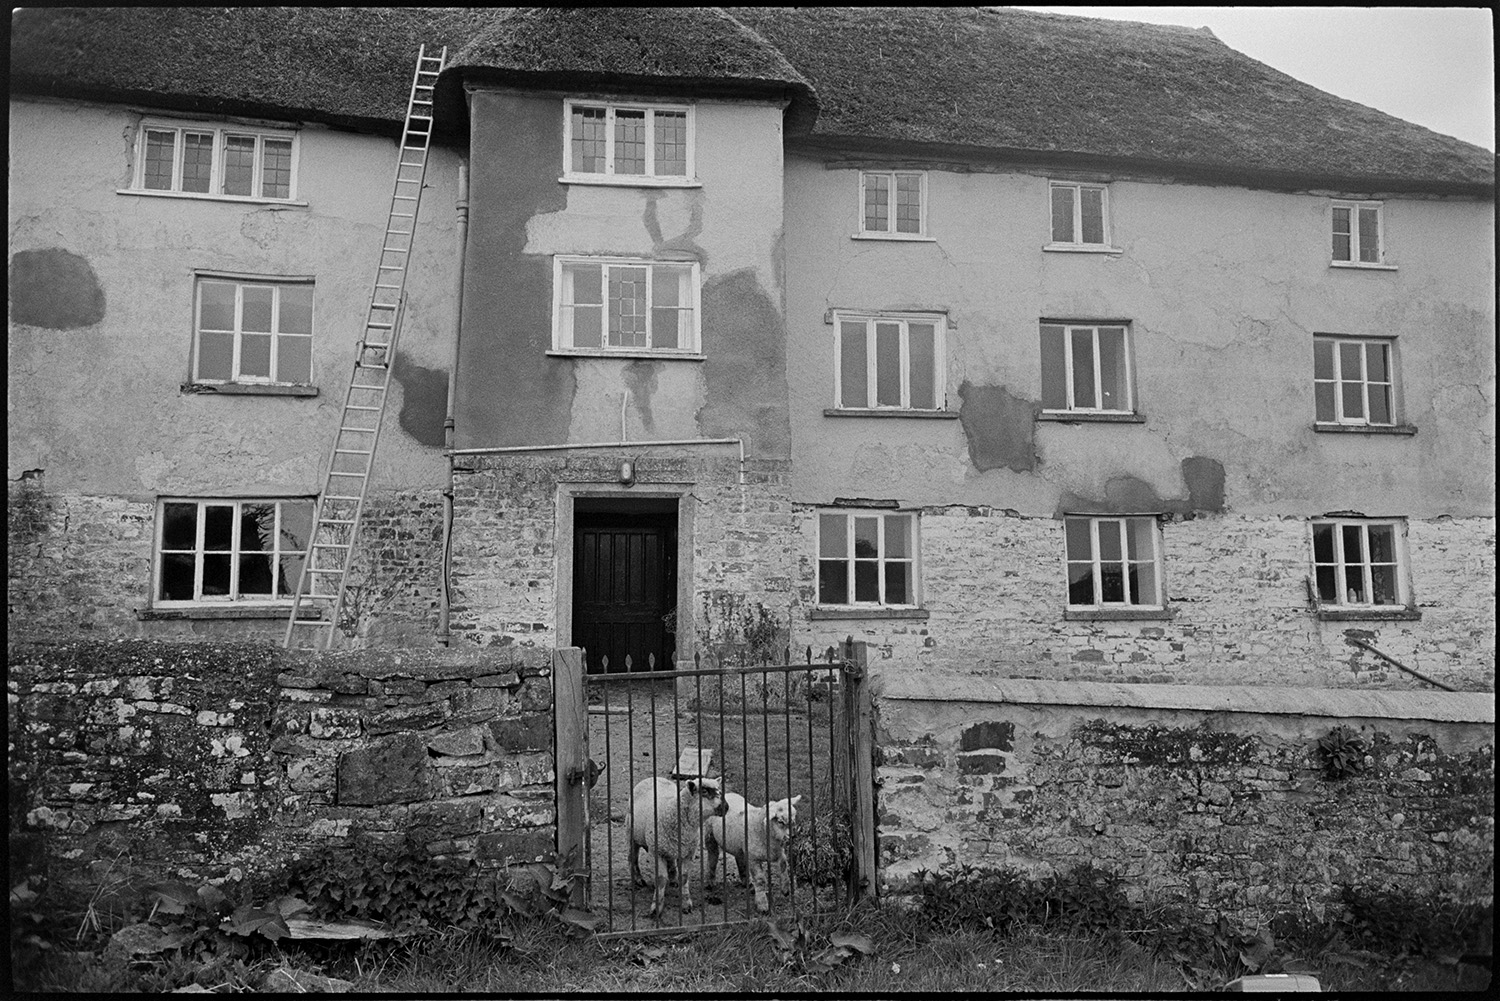 Thatch and cob farmhouse with lambs penned in front garden.
[A thatch and cob three storey farmhouse at Brookland, near Chulmleigh. There are two lambs behind a metal garden gate, and a ladder is standing against the house wall.]